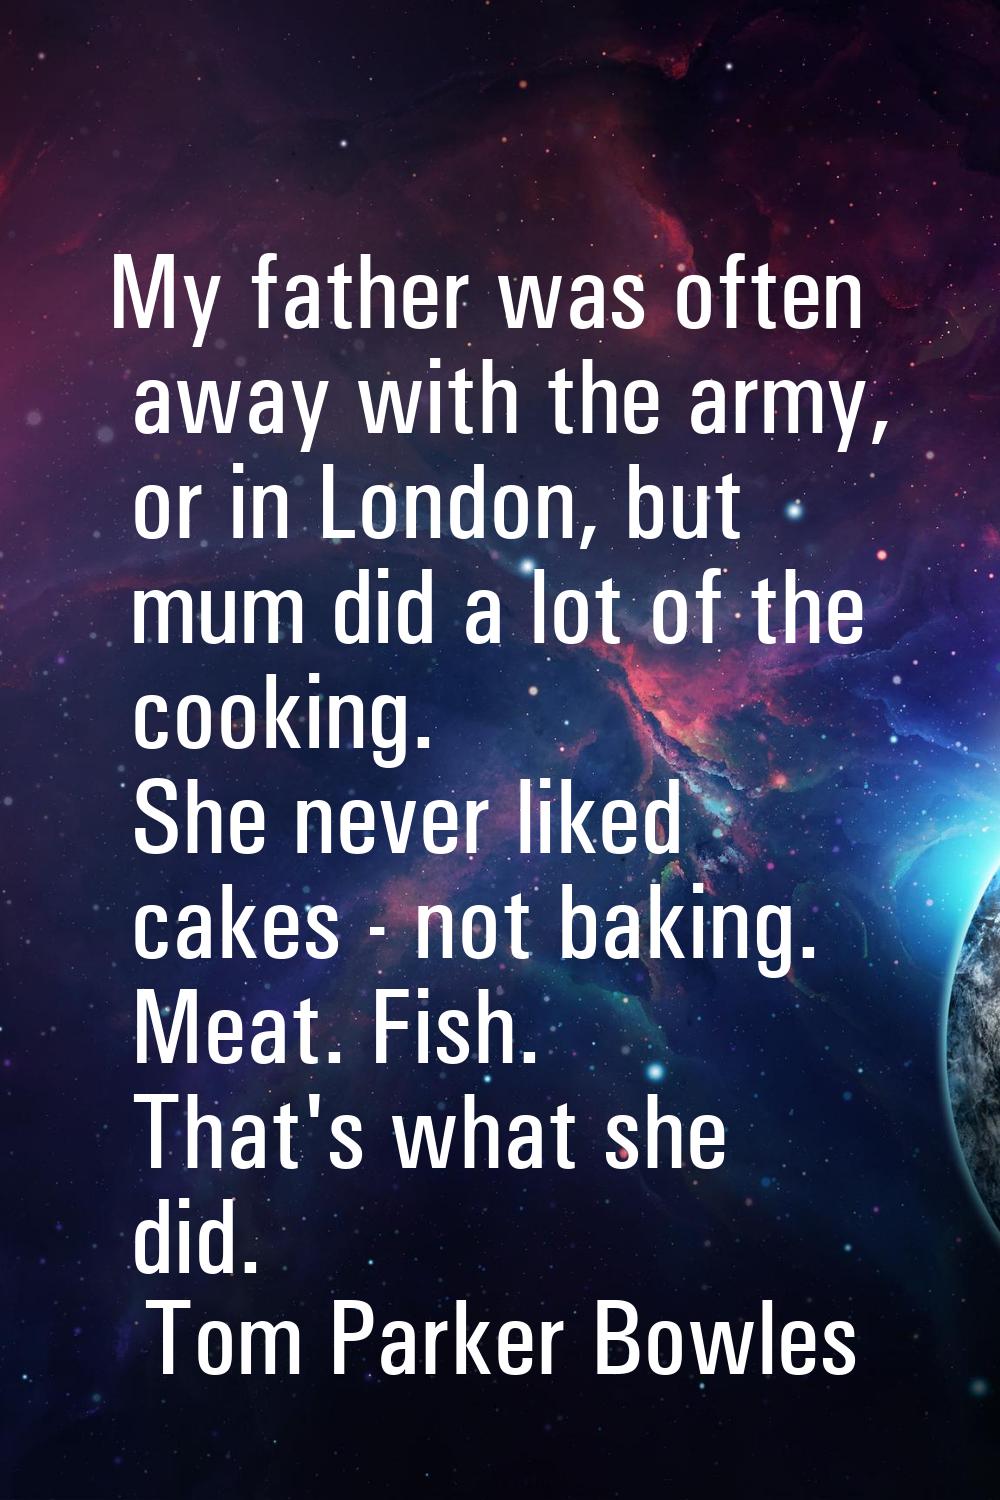 My father was often away with the army, or in London, but mum did a lot of the cooking. She never l